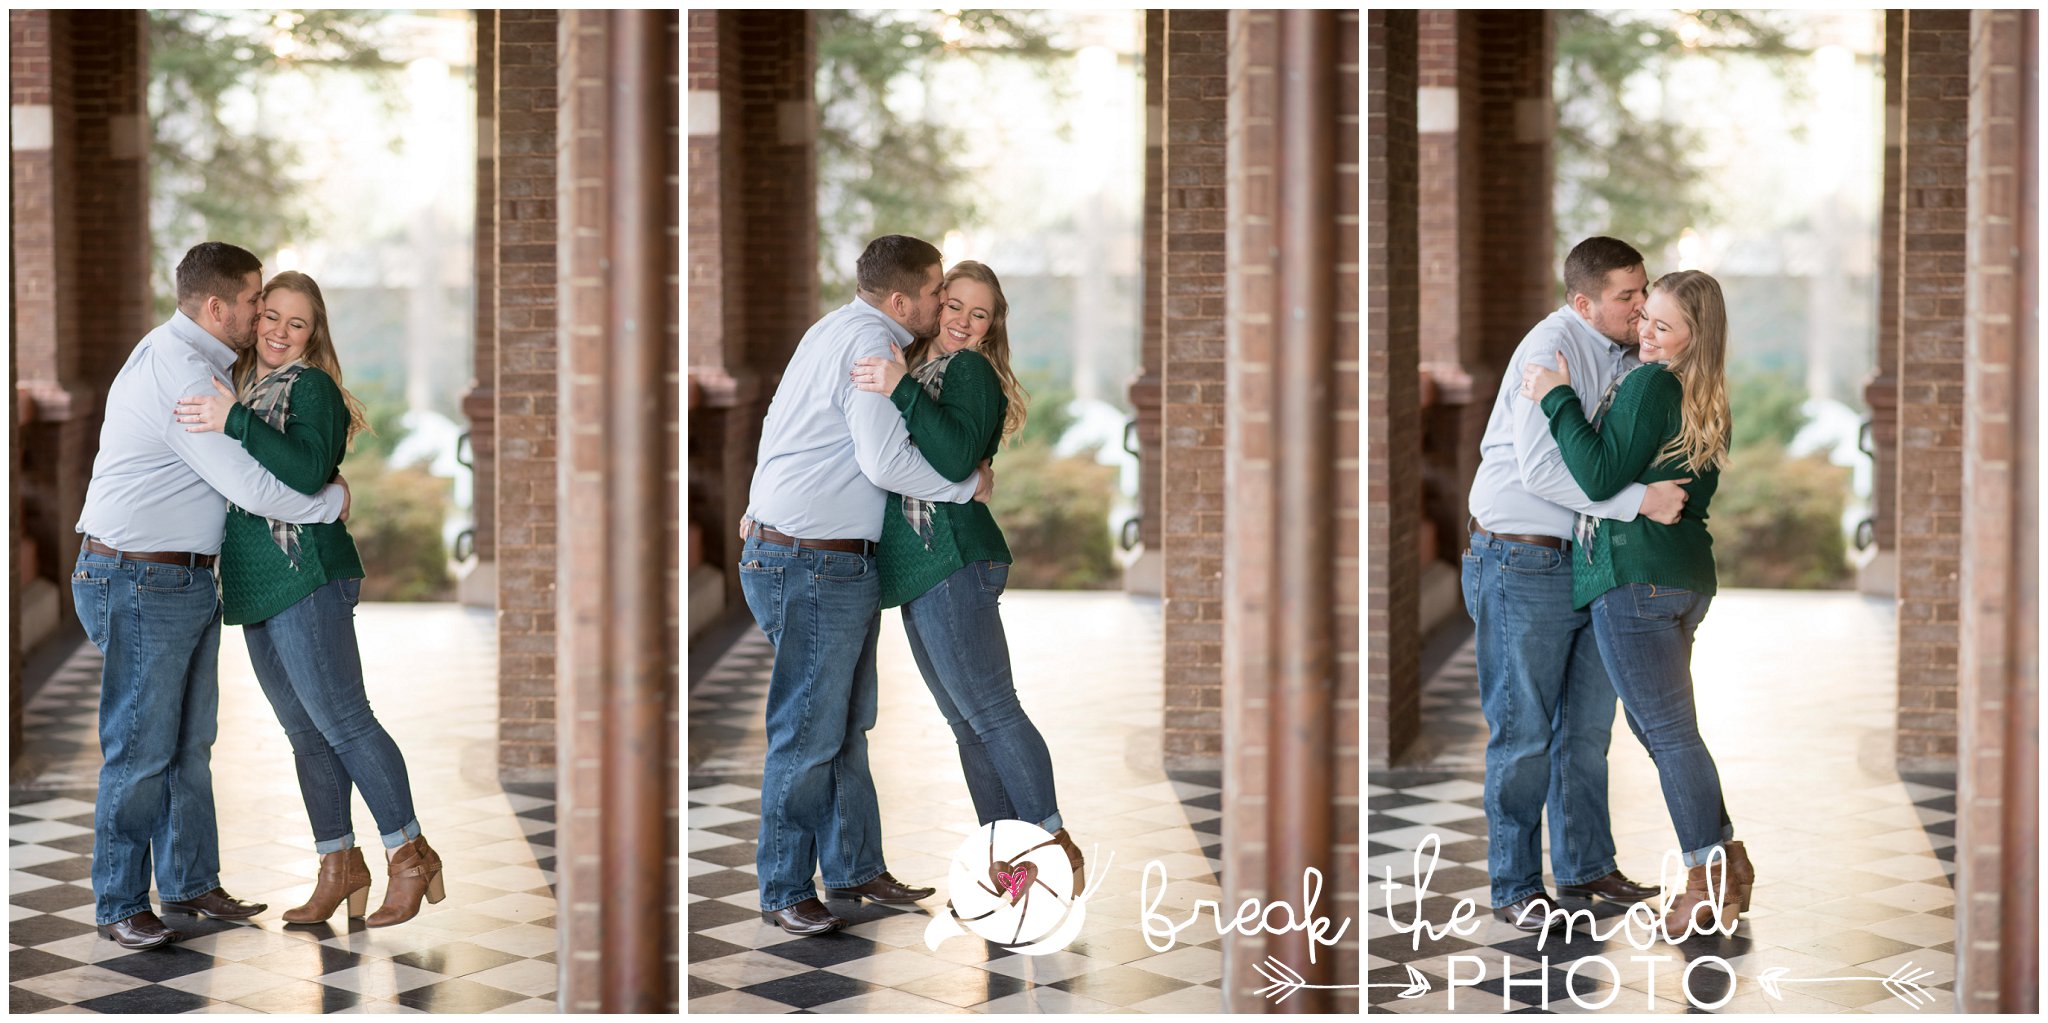 break-the-mold-photo-engagement-session-downtown-knoxville-try-before-you-buy_9877.jpg